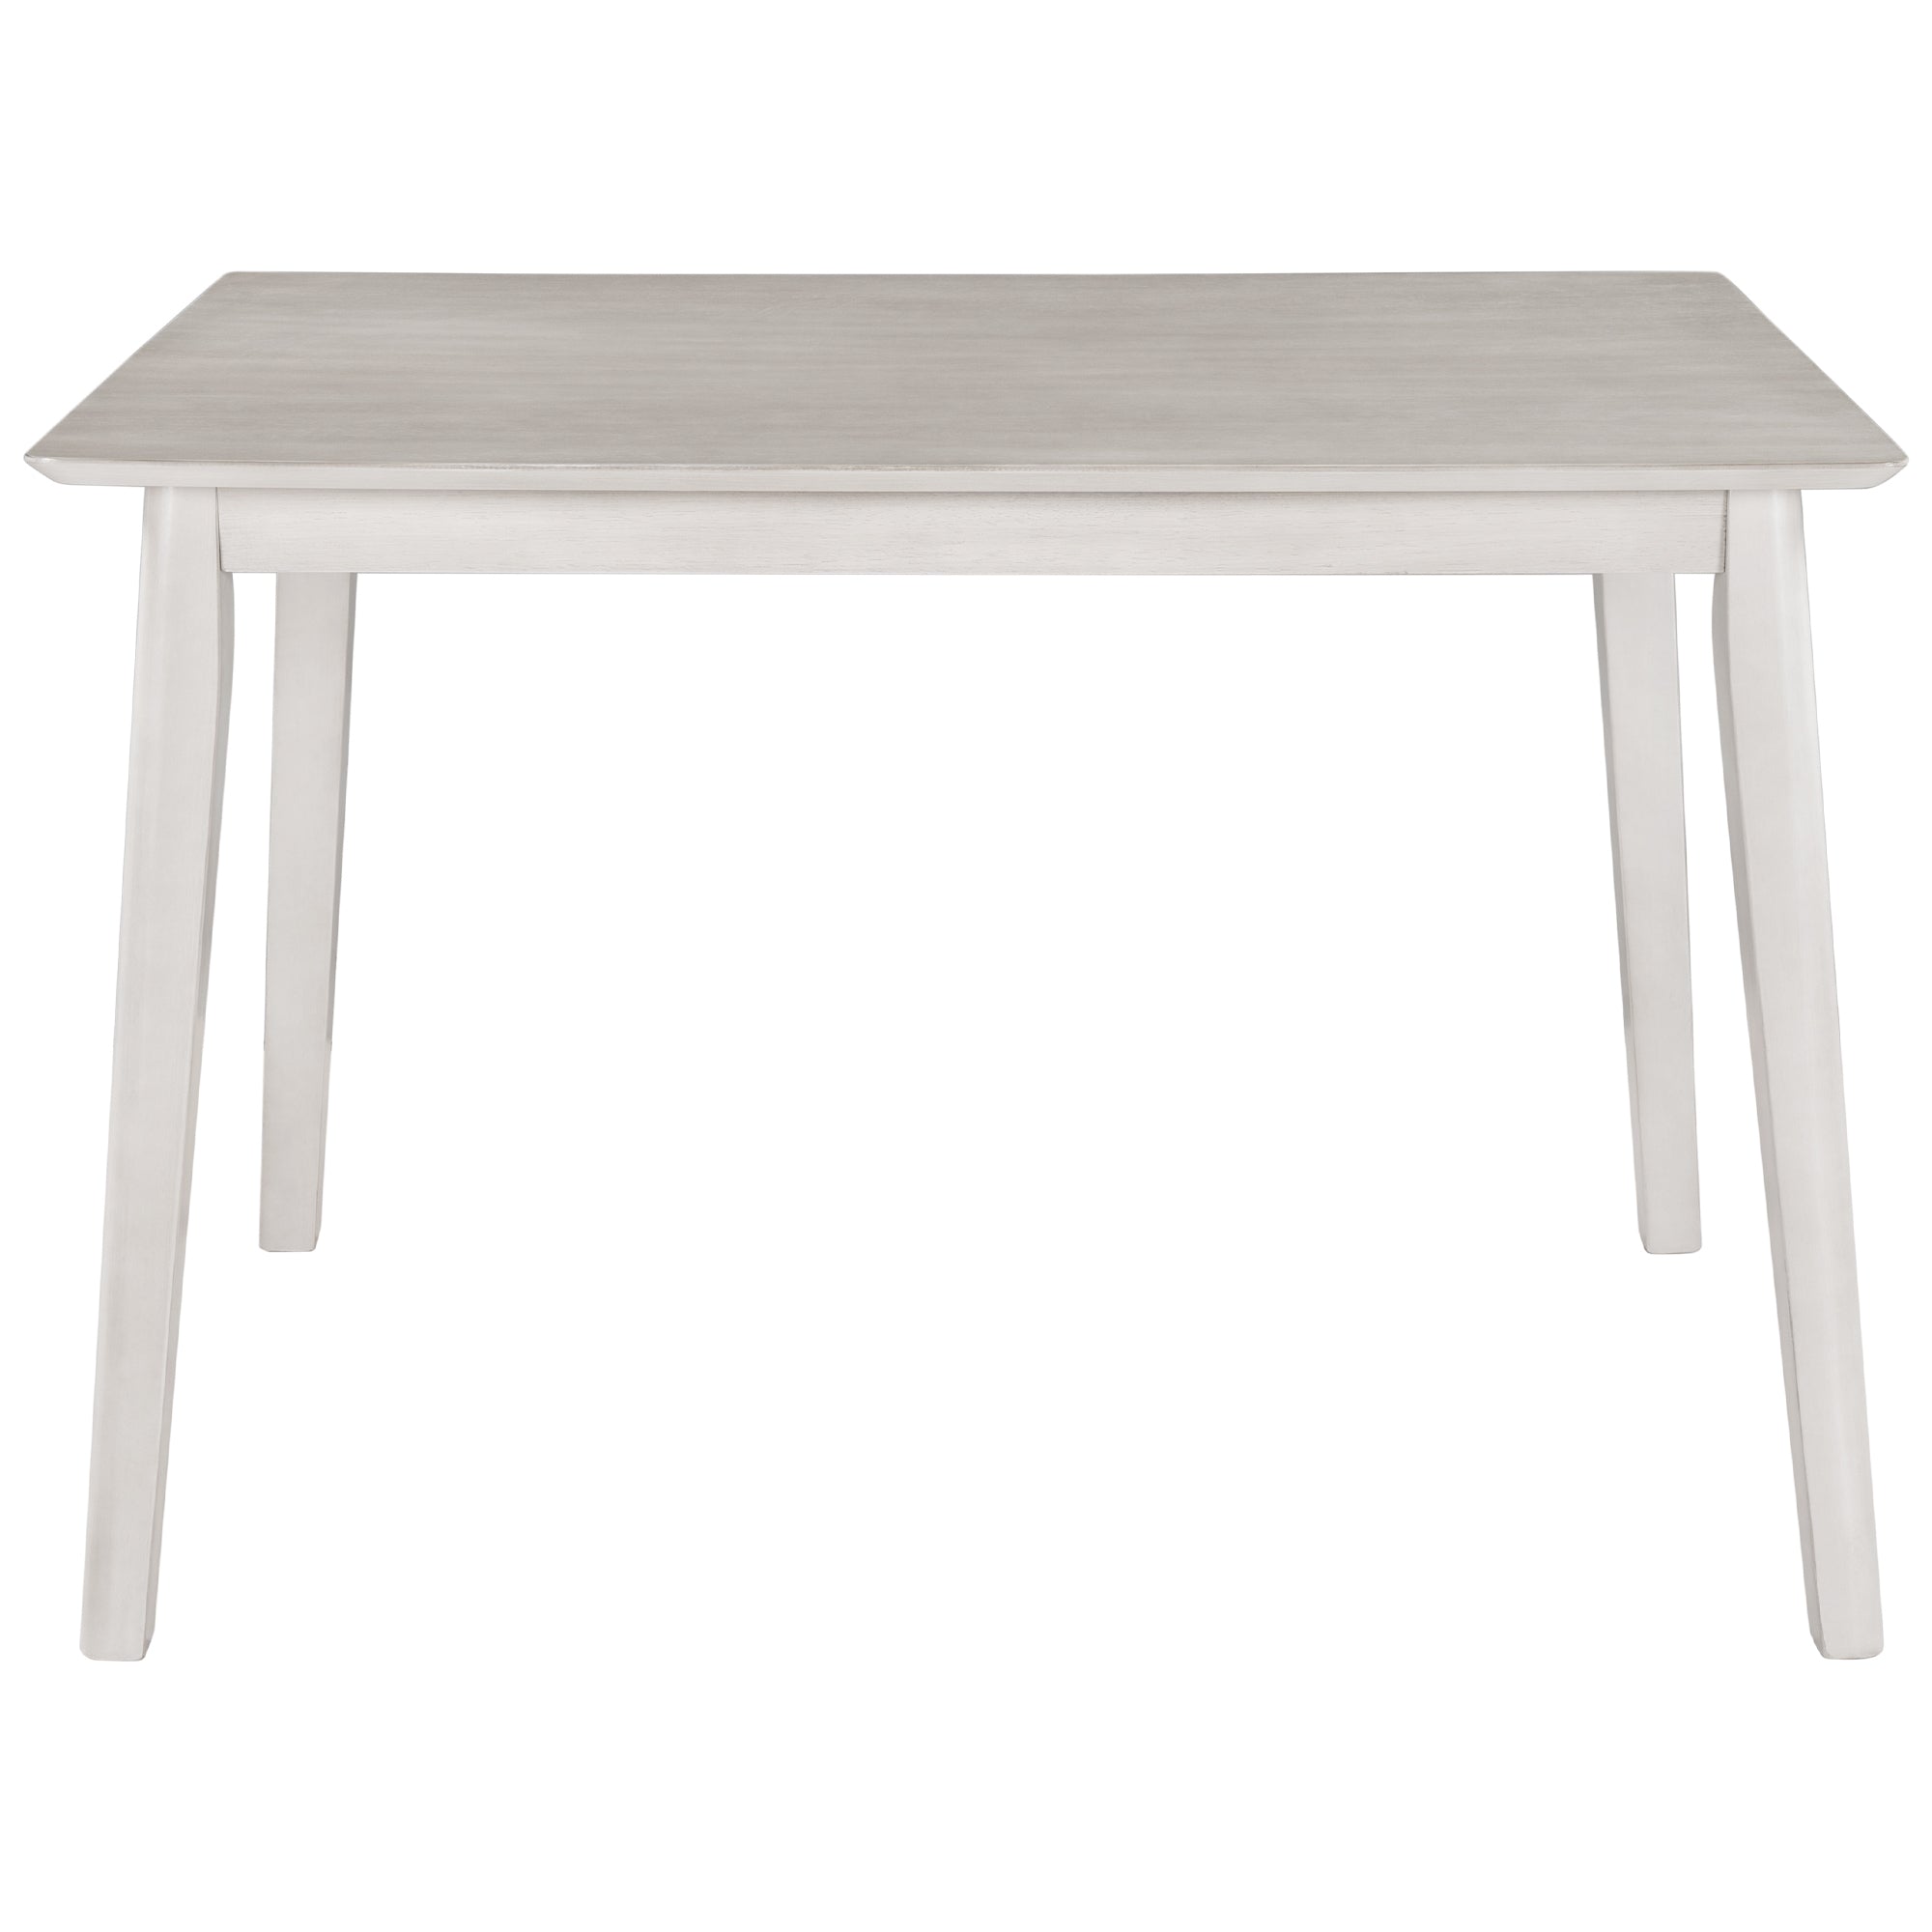 Farmhouse Rustic Wood Kitchen Dining Table, Light Gray+White